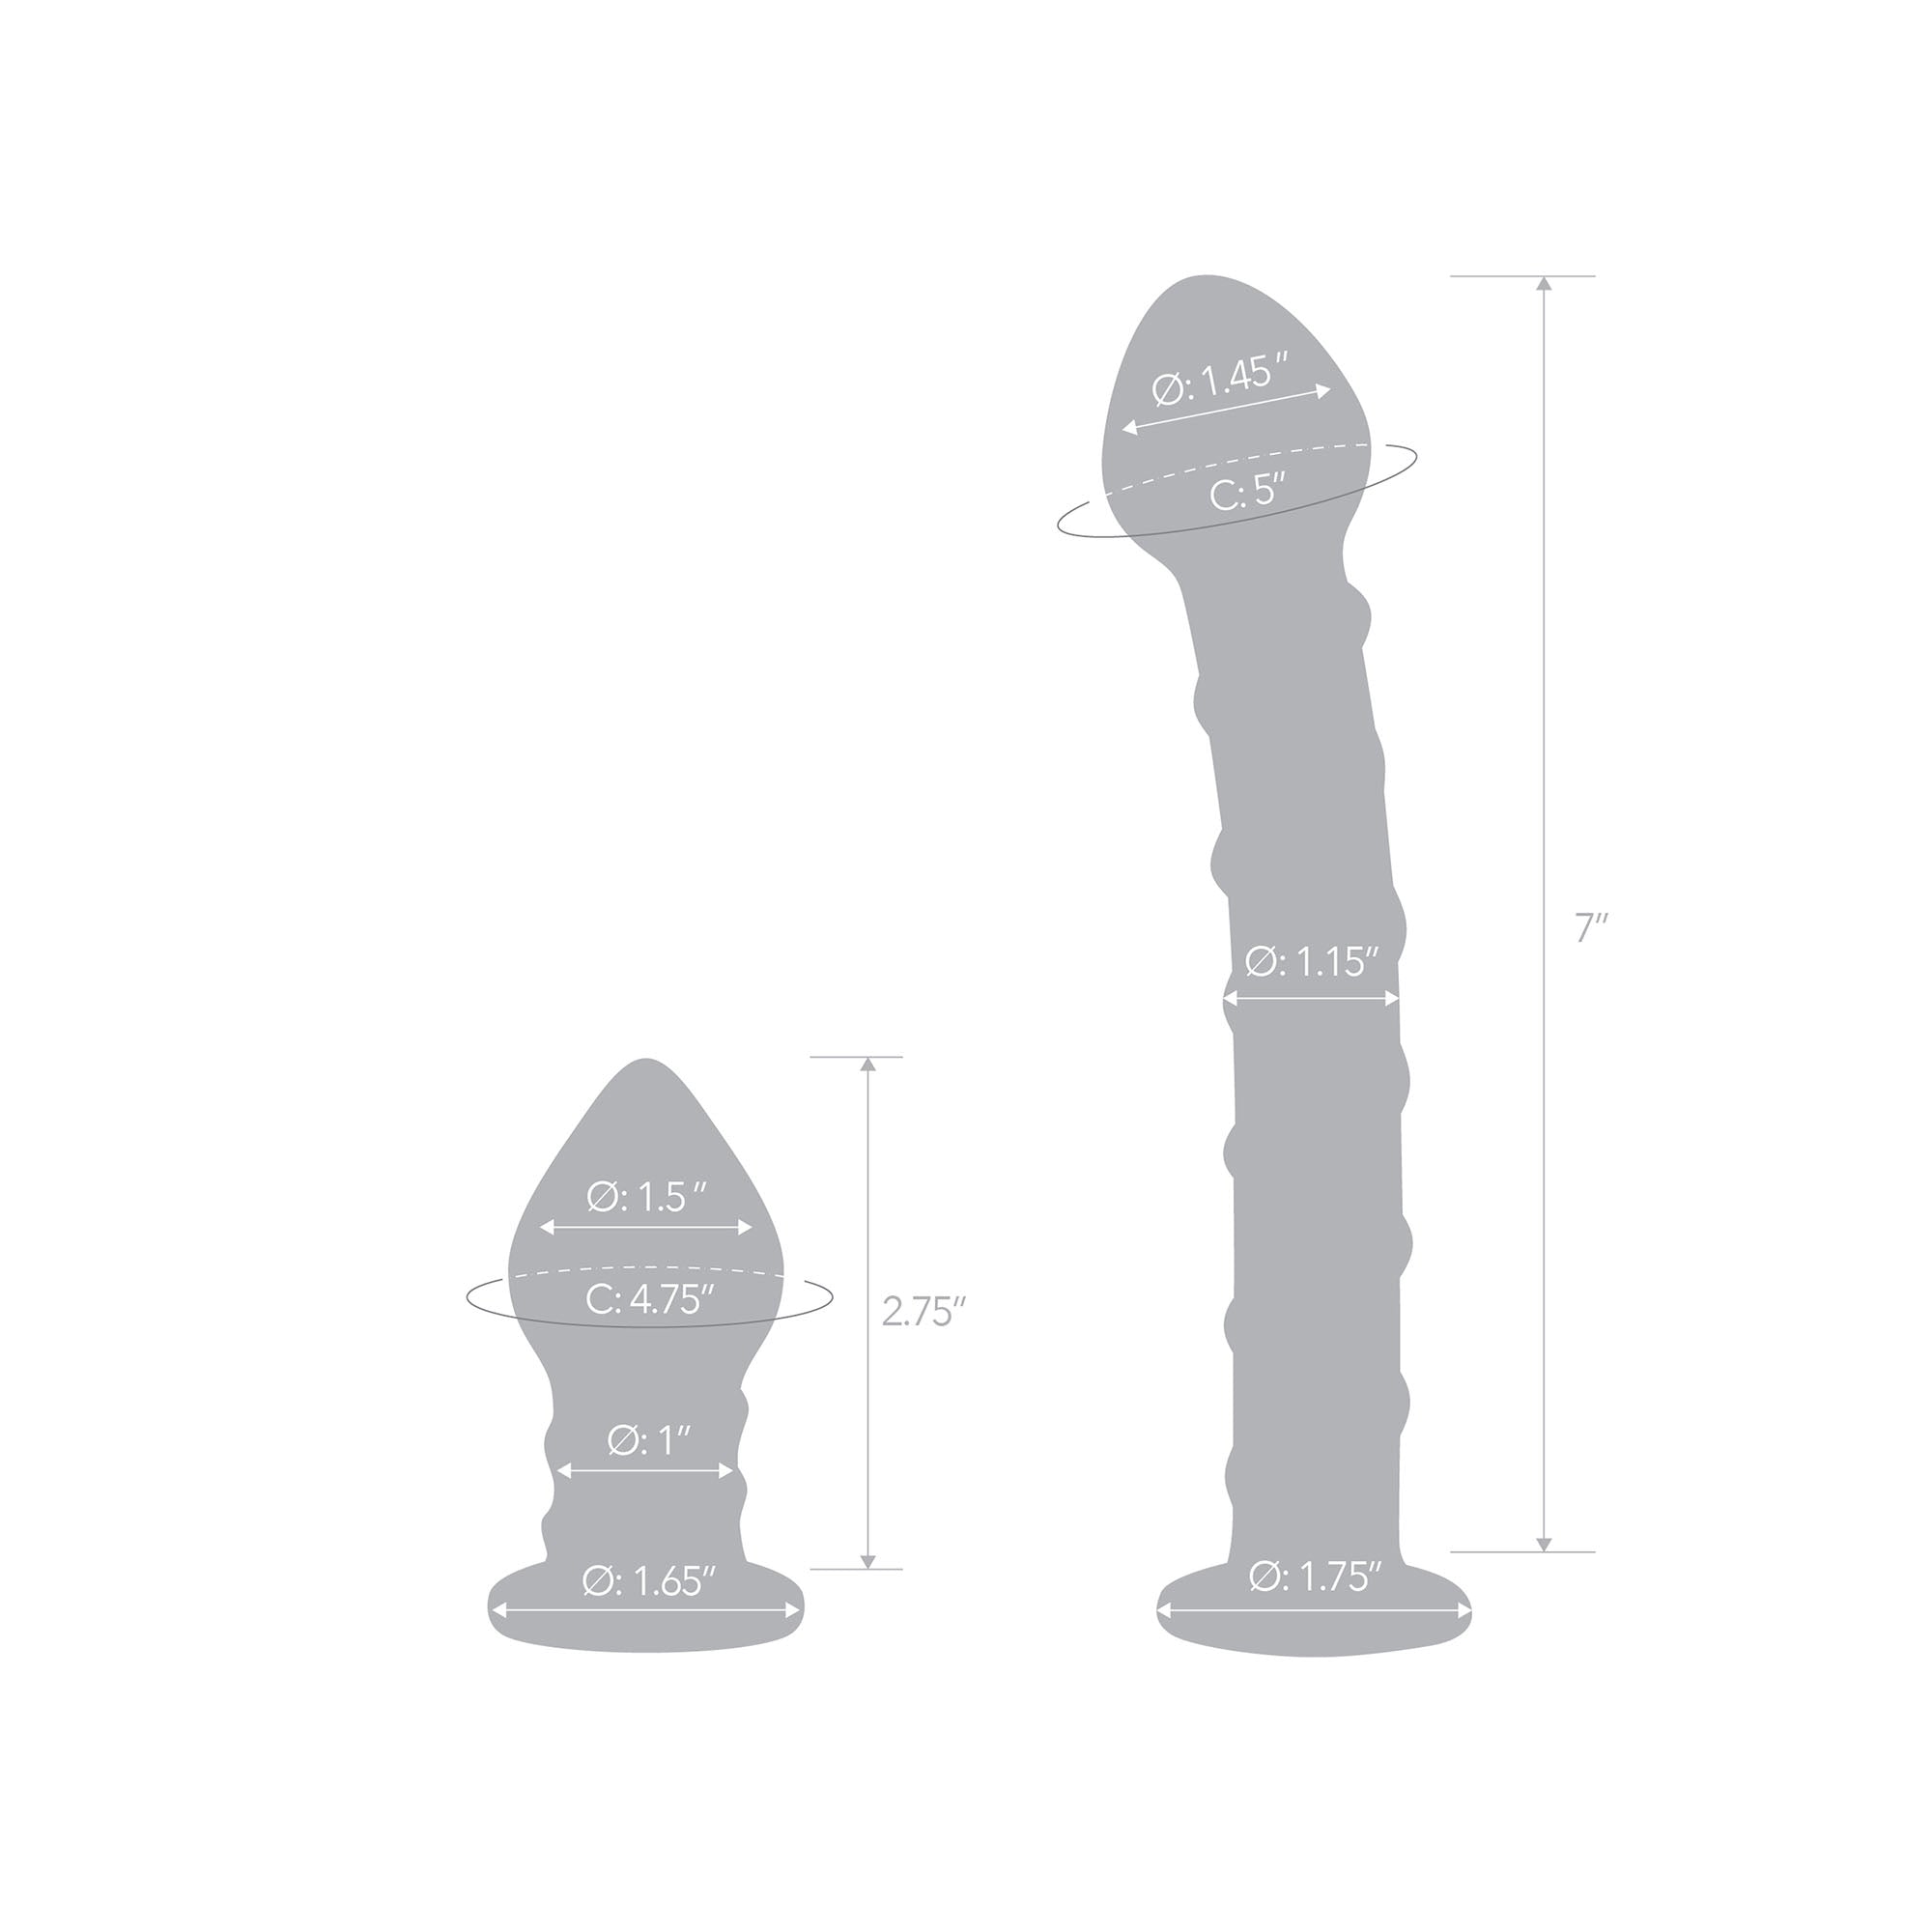 Specifications of the Double Penetration Glass Swirly Dildo & Butt Plug Set